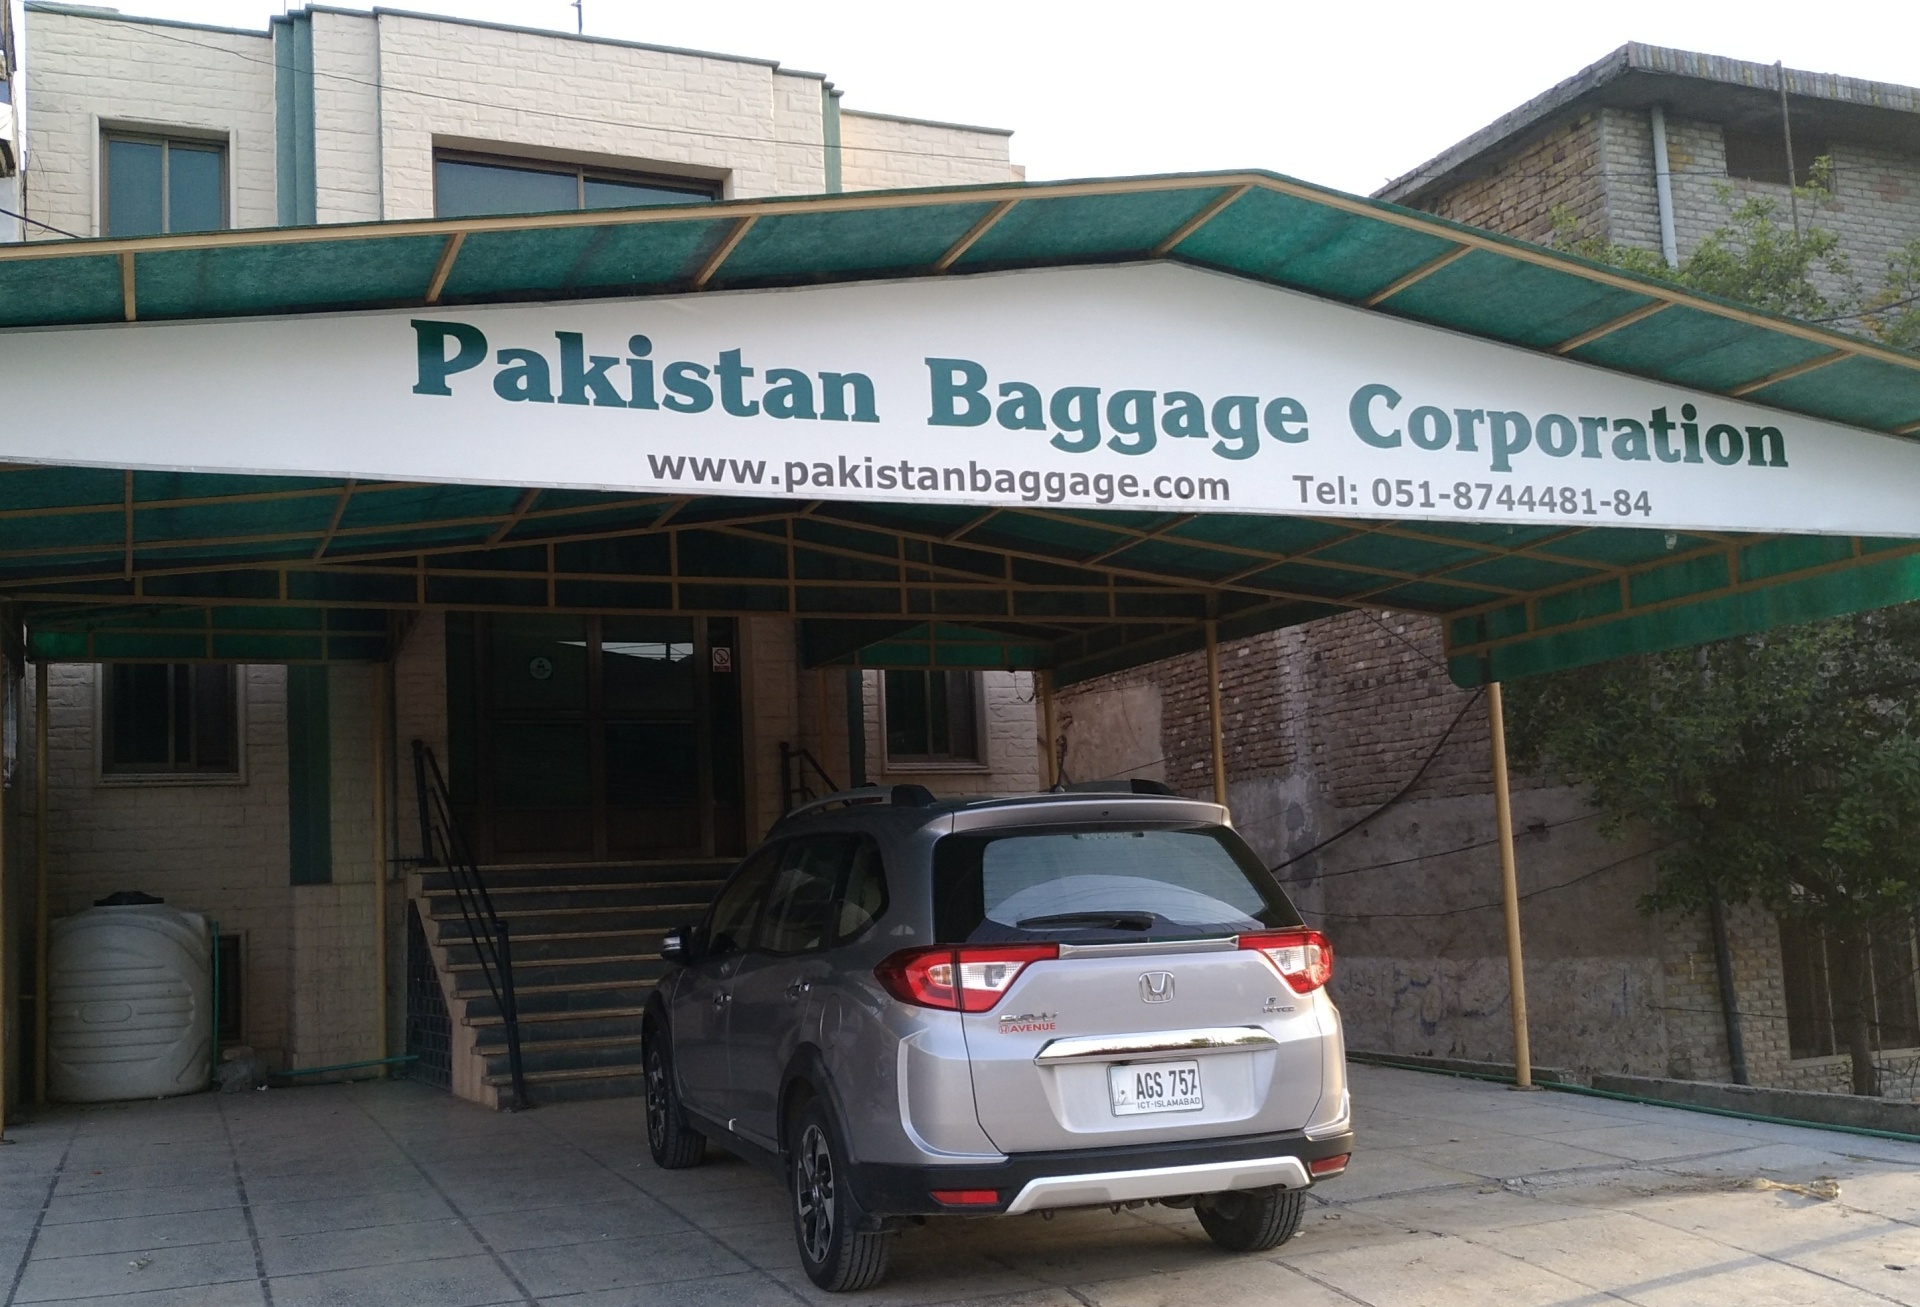 About Pakistan Baggage